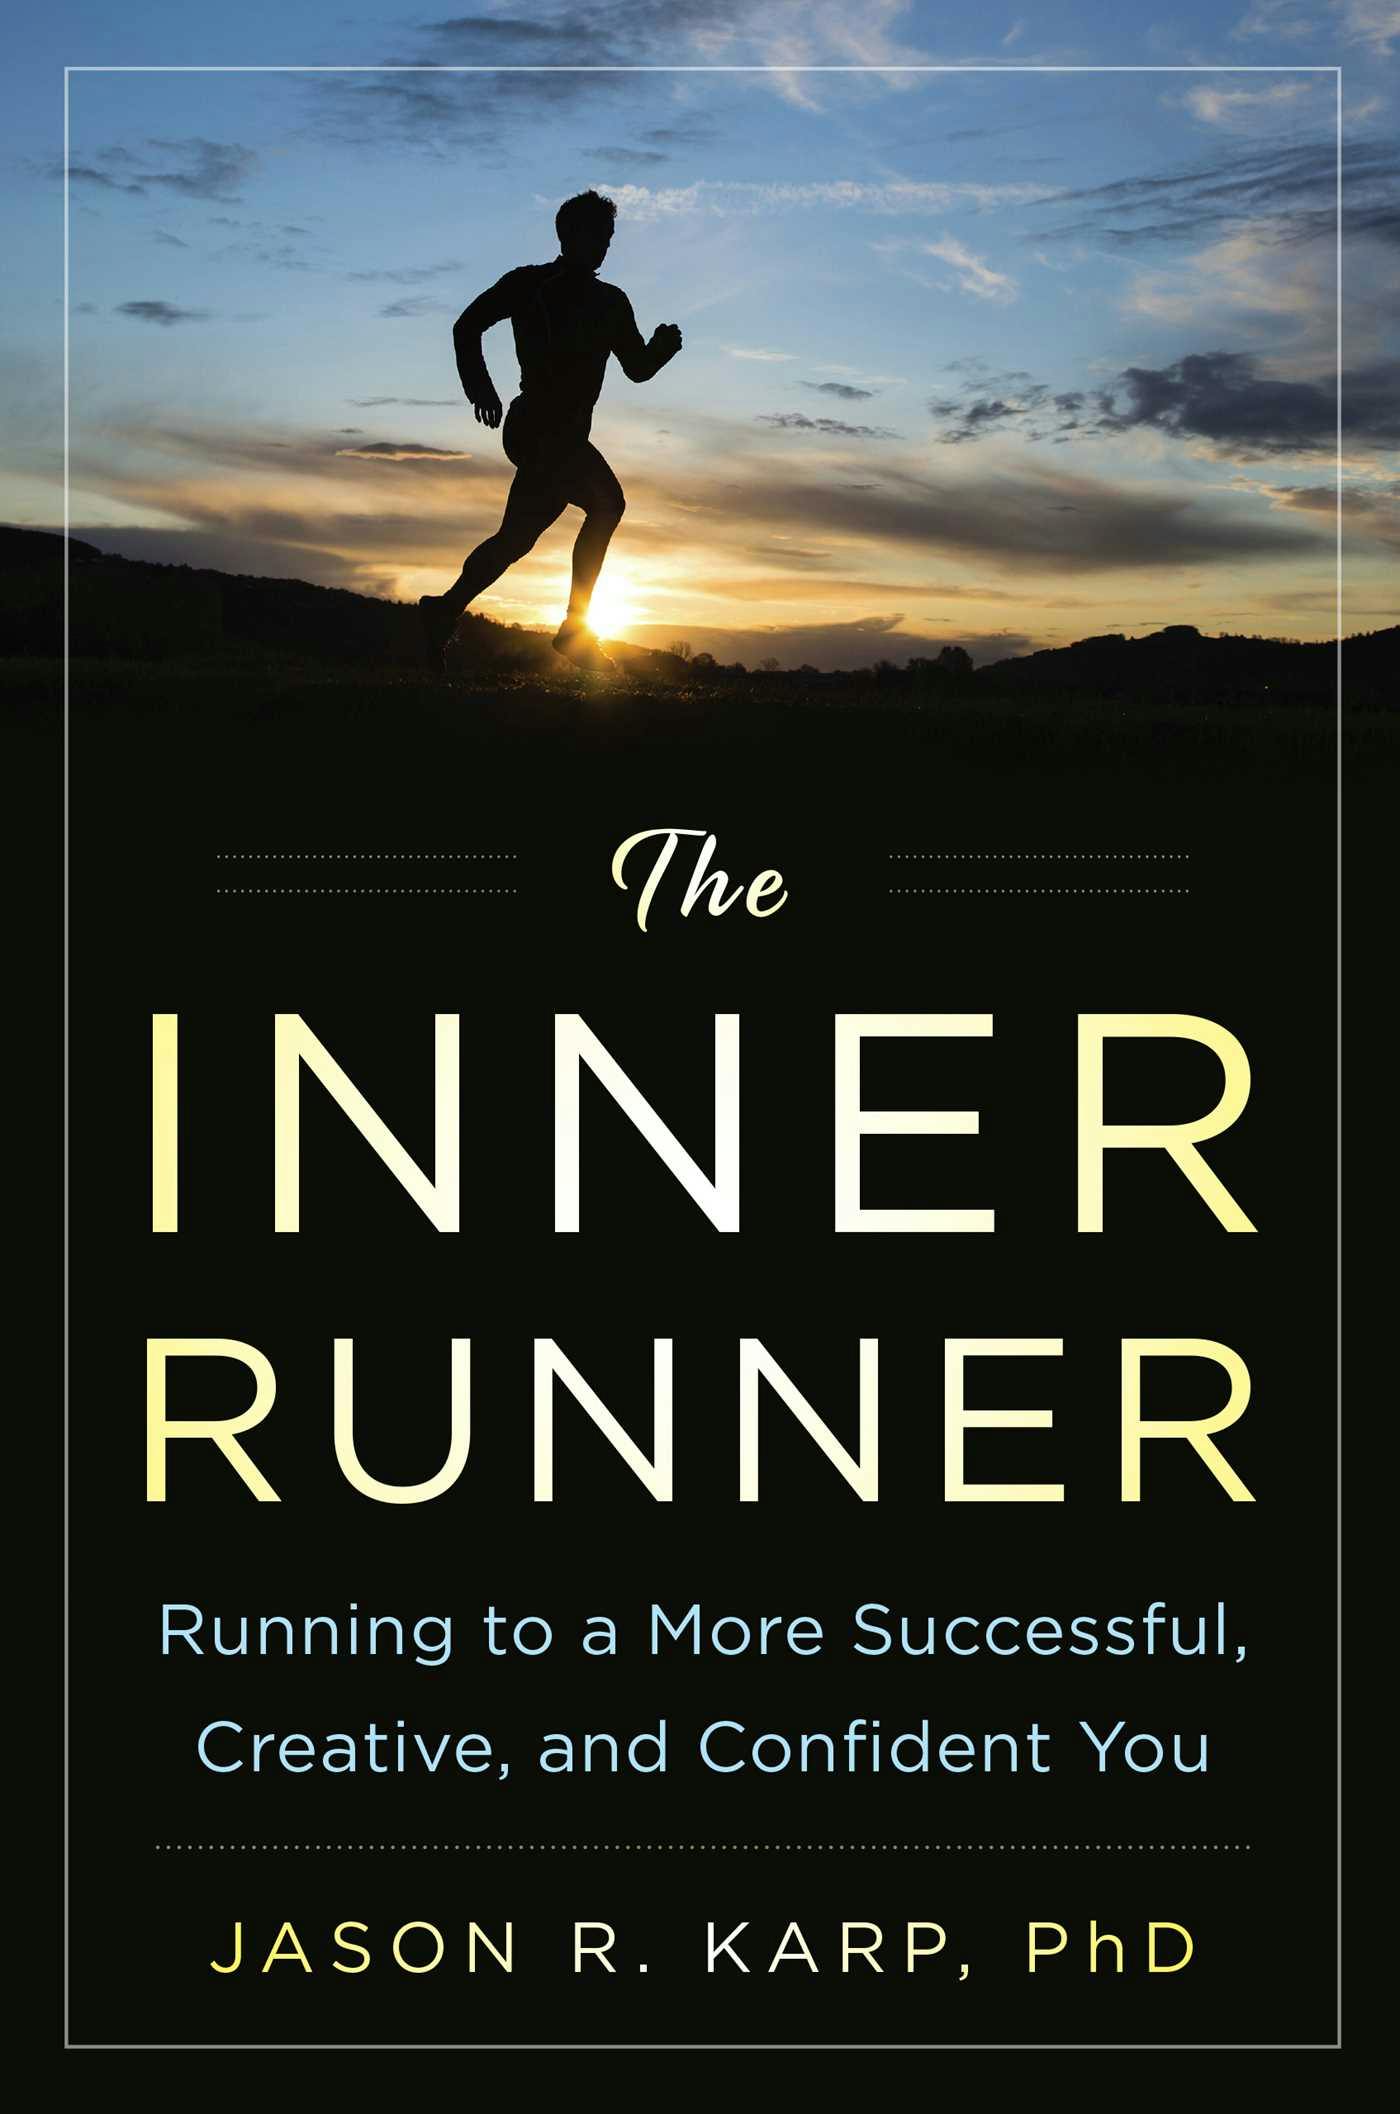 The Inner Runner: Running to a More Successful, Creative, and Confident You - Jason R. Karp